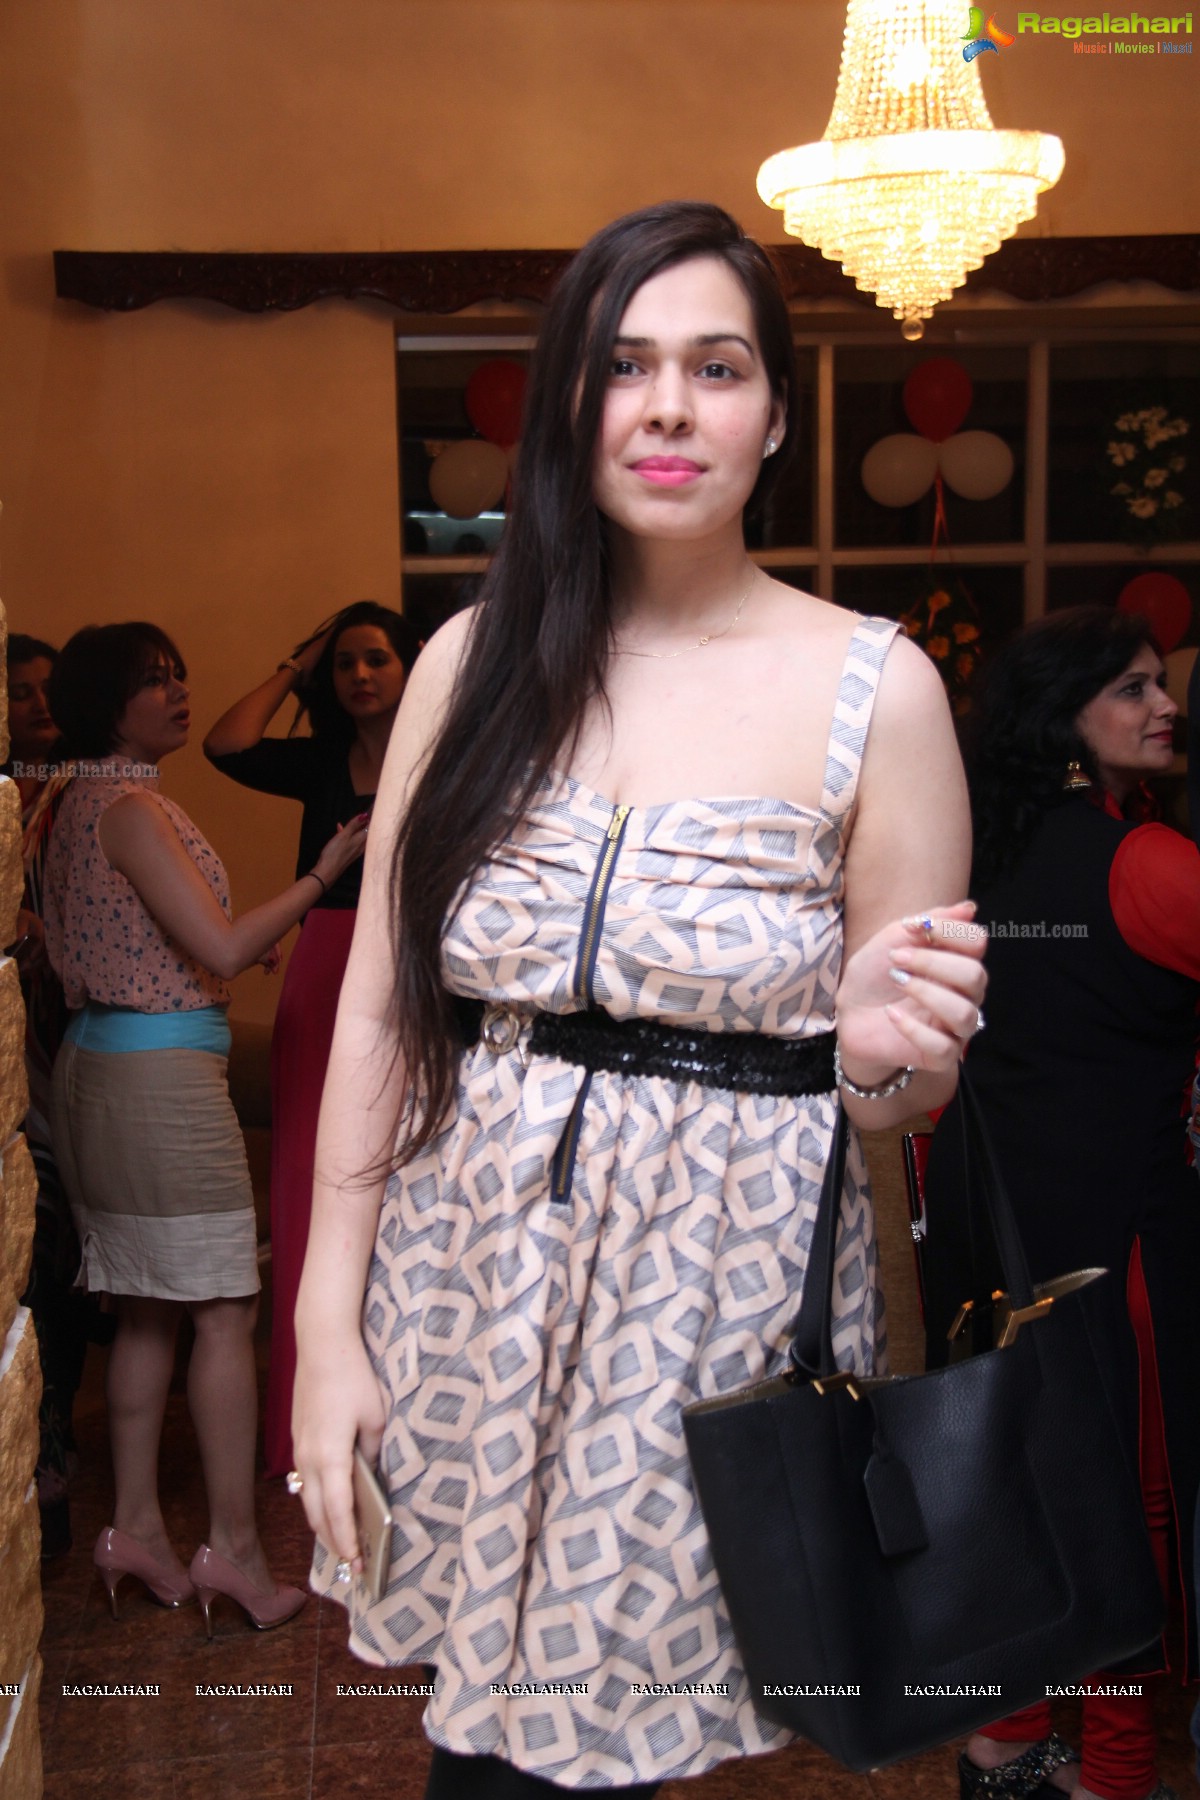 Grand Launch of Sawa Reloaded Cafe and Restaurant in Hyderabad